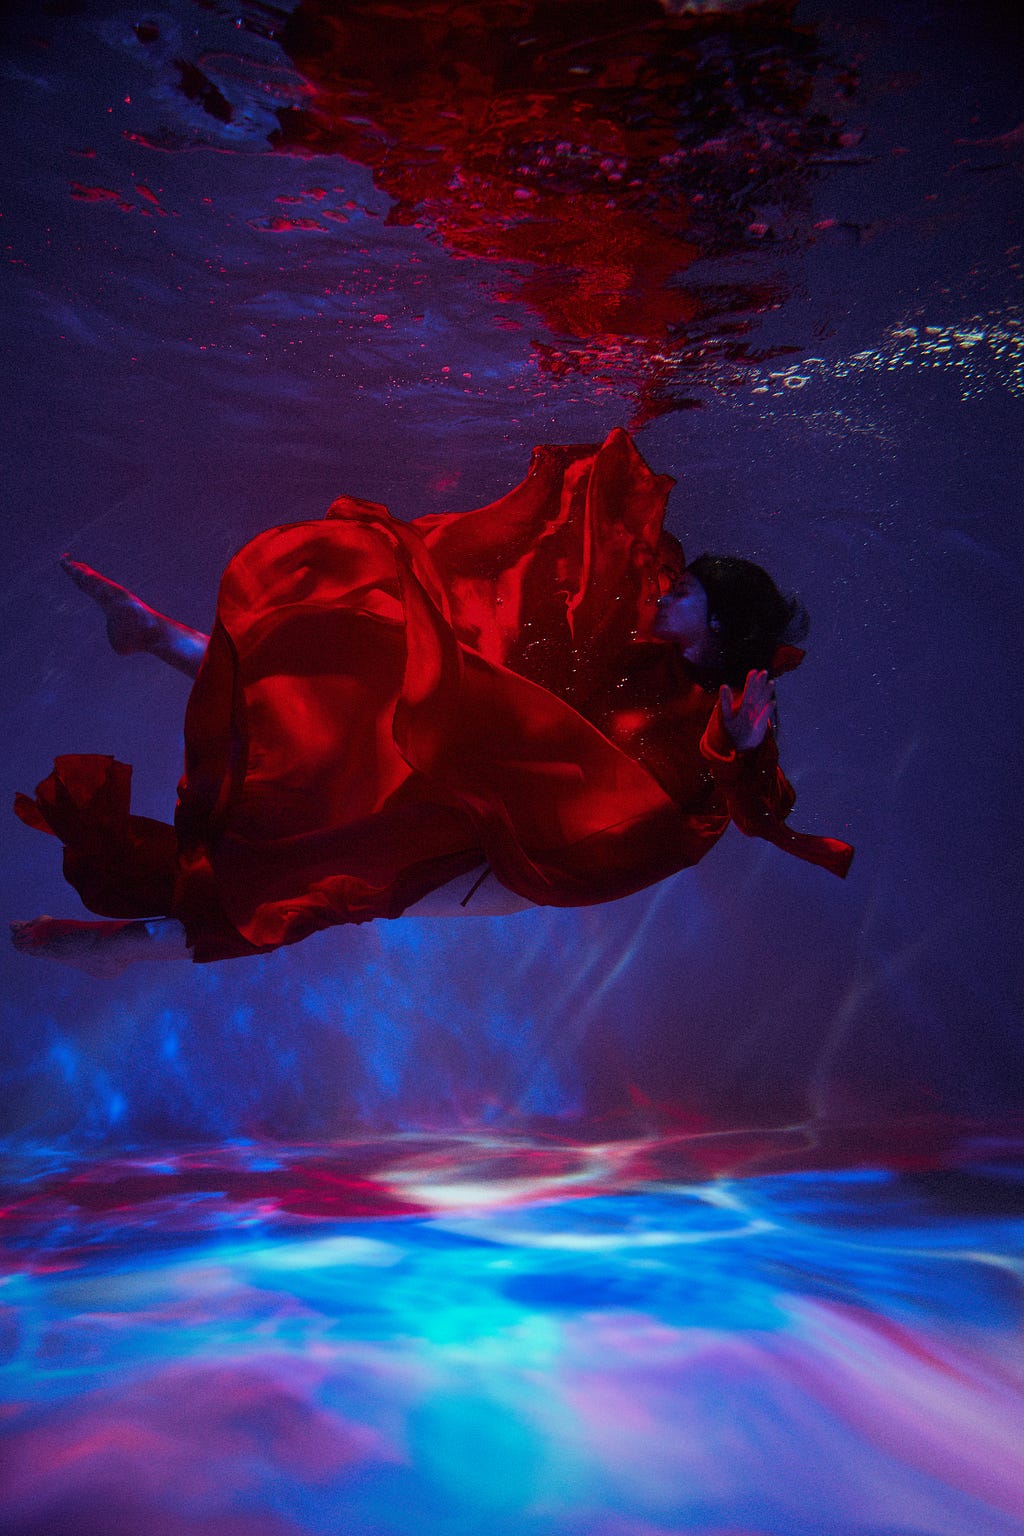 A woman with a red dress floating in the water